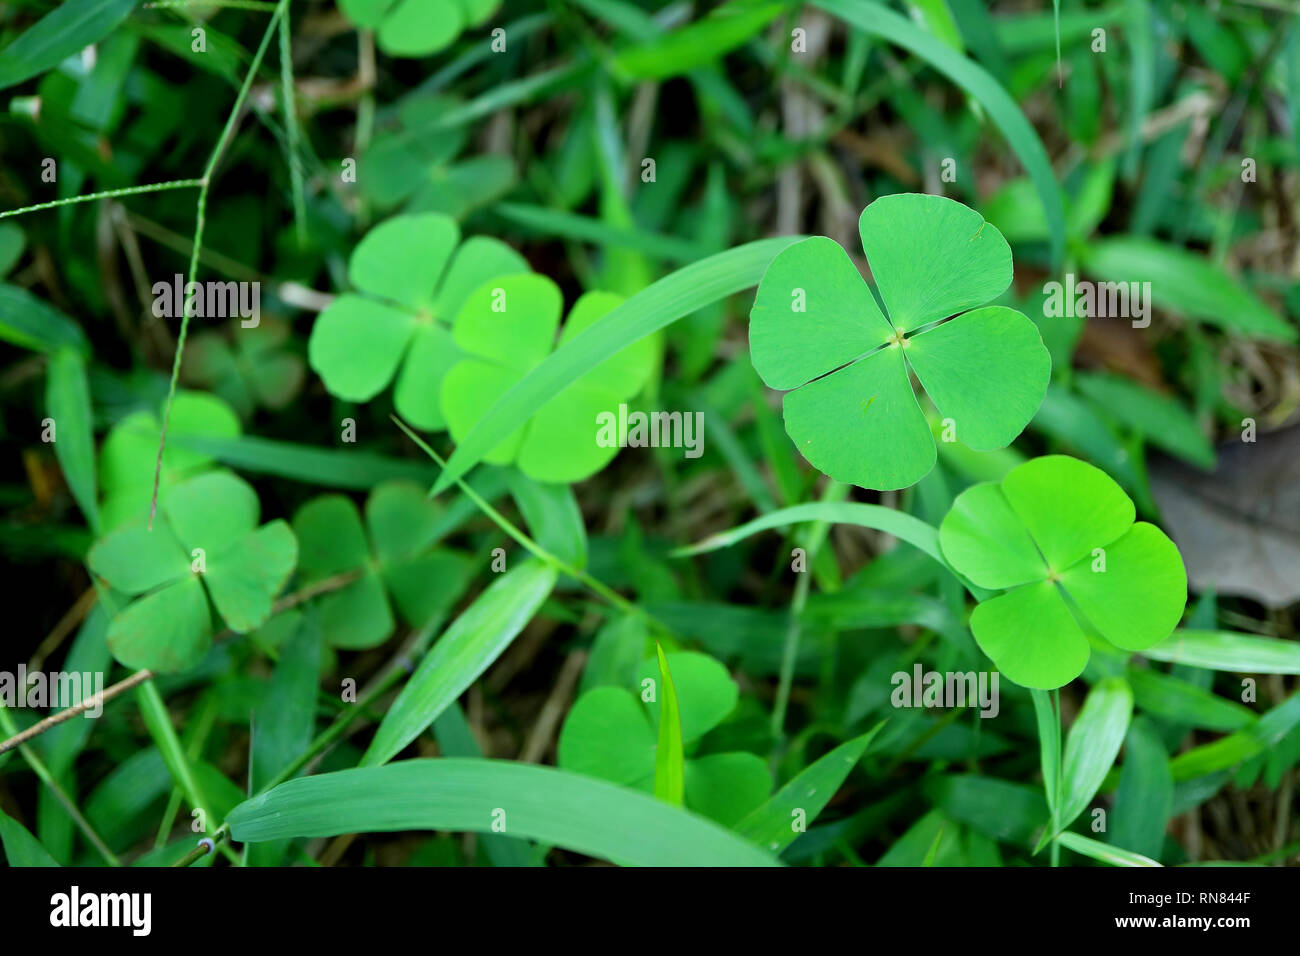 Bunch of Vibrant Green Four-leaf Clovers in the Grass Field Stock Photo